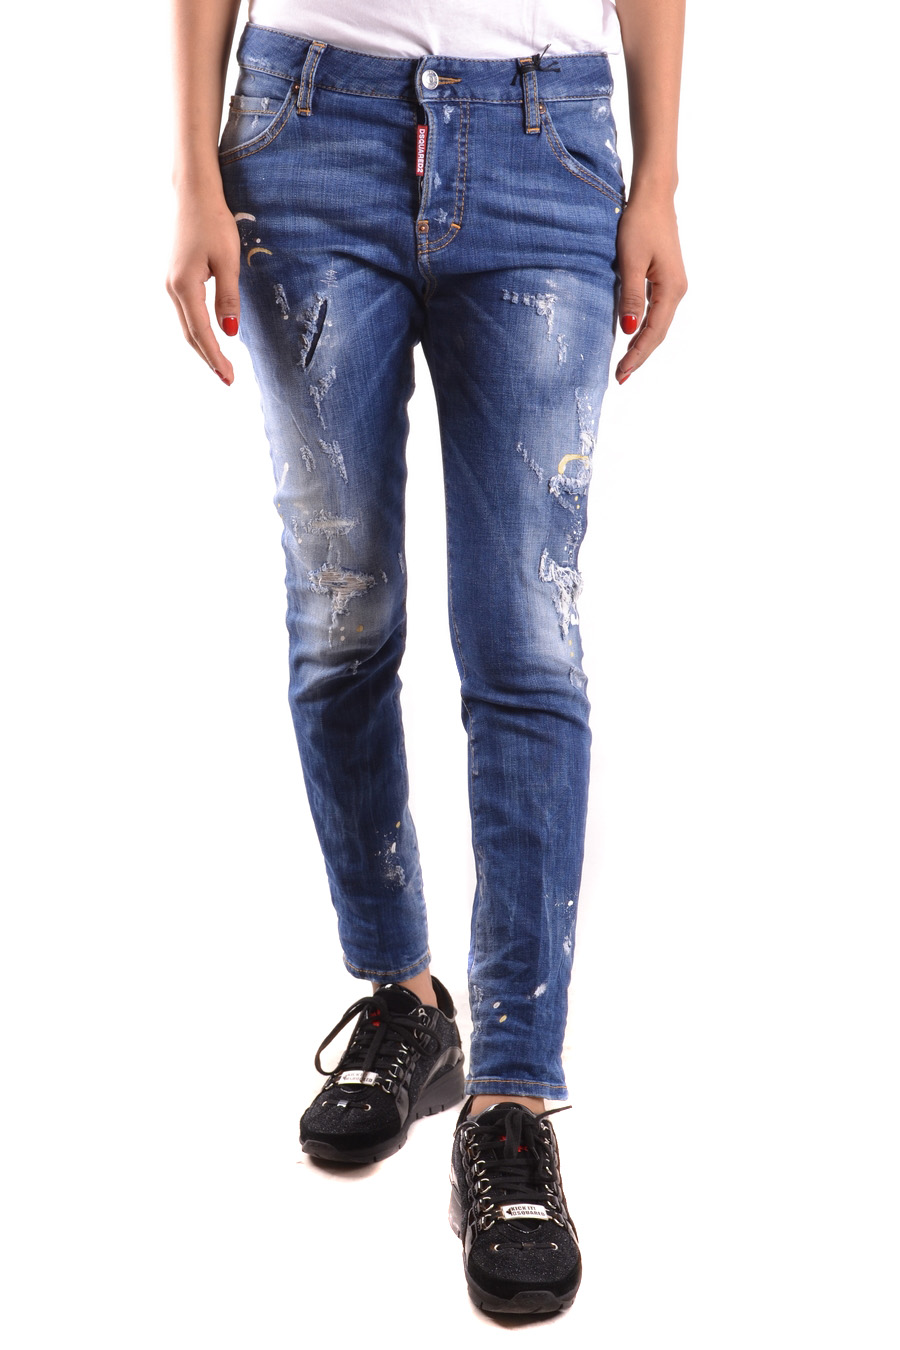 dsquared jeans india - 55% remise 